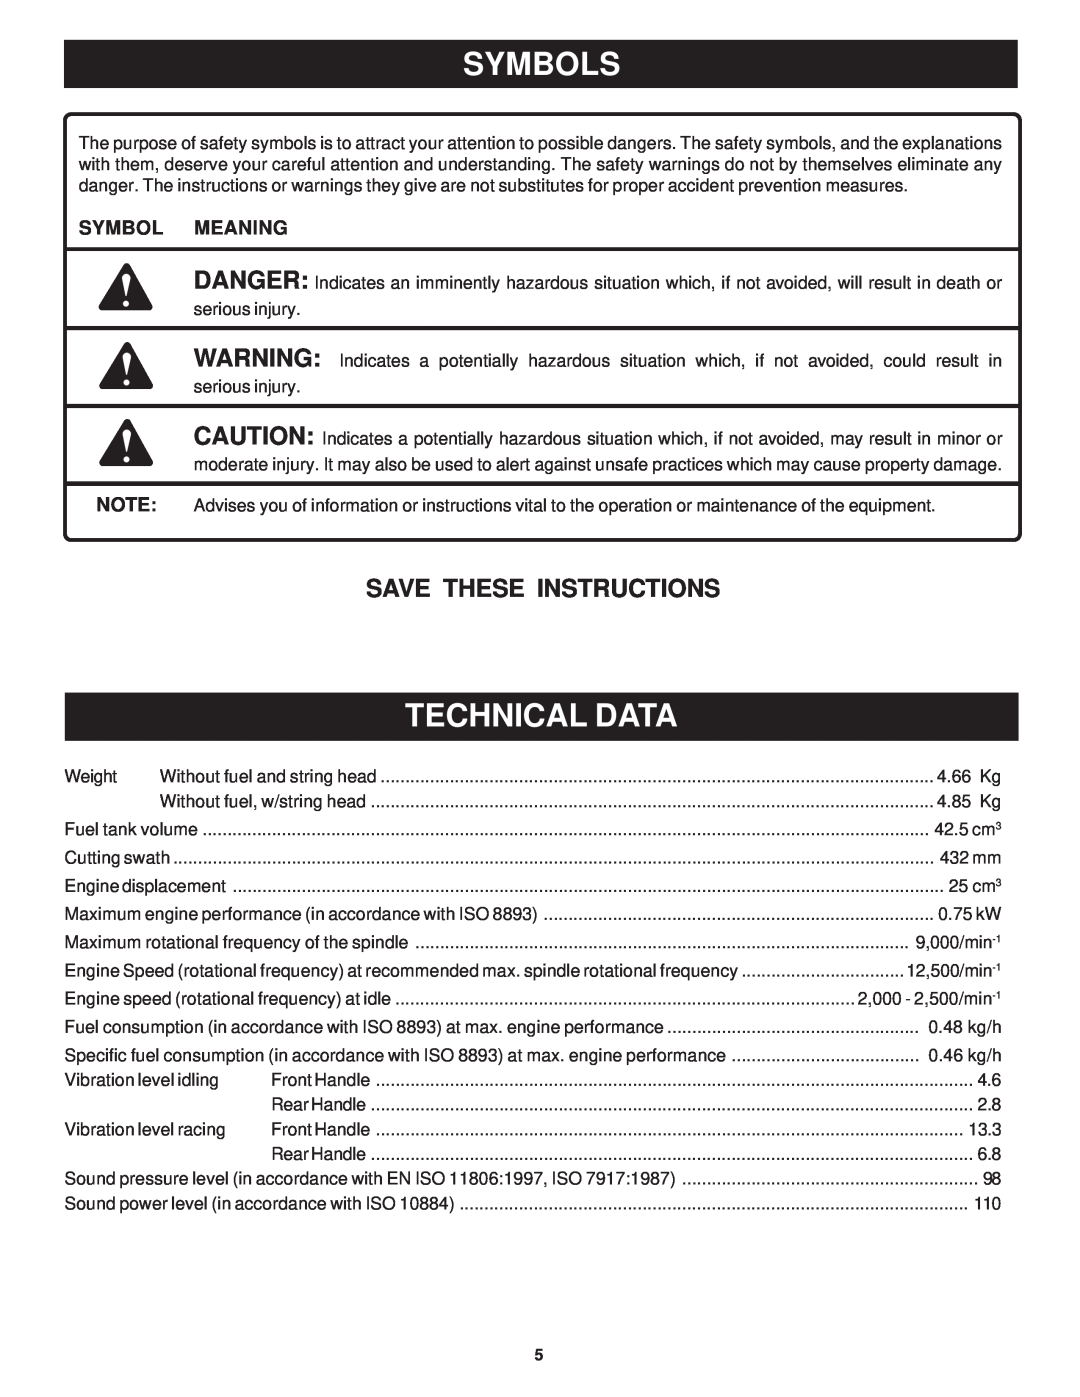 Ryobi Outdoor RPT2543C, RY7011 manual Technical Data, Symbols, Save These Instructions, Symbol Meaning 